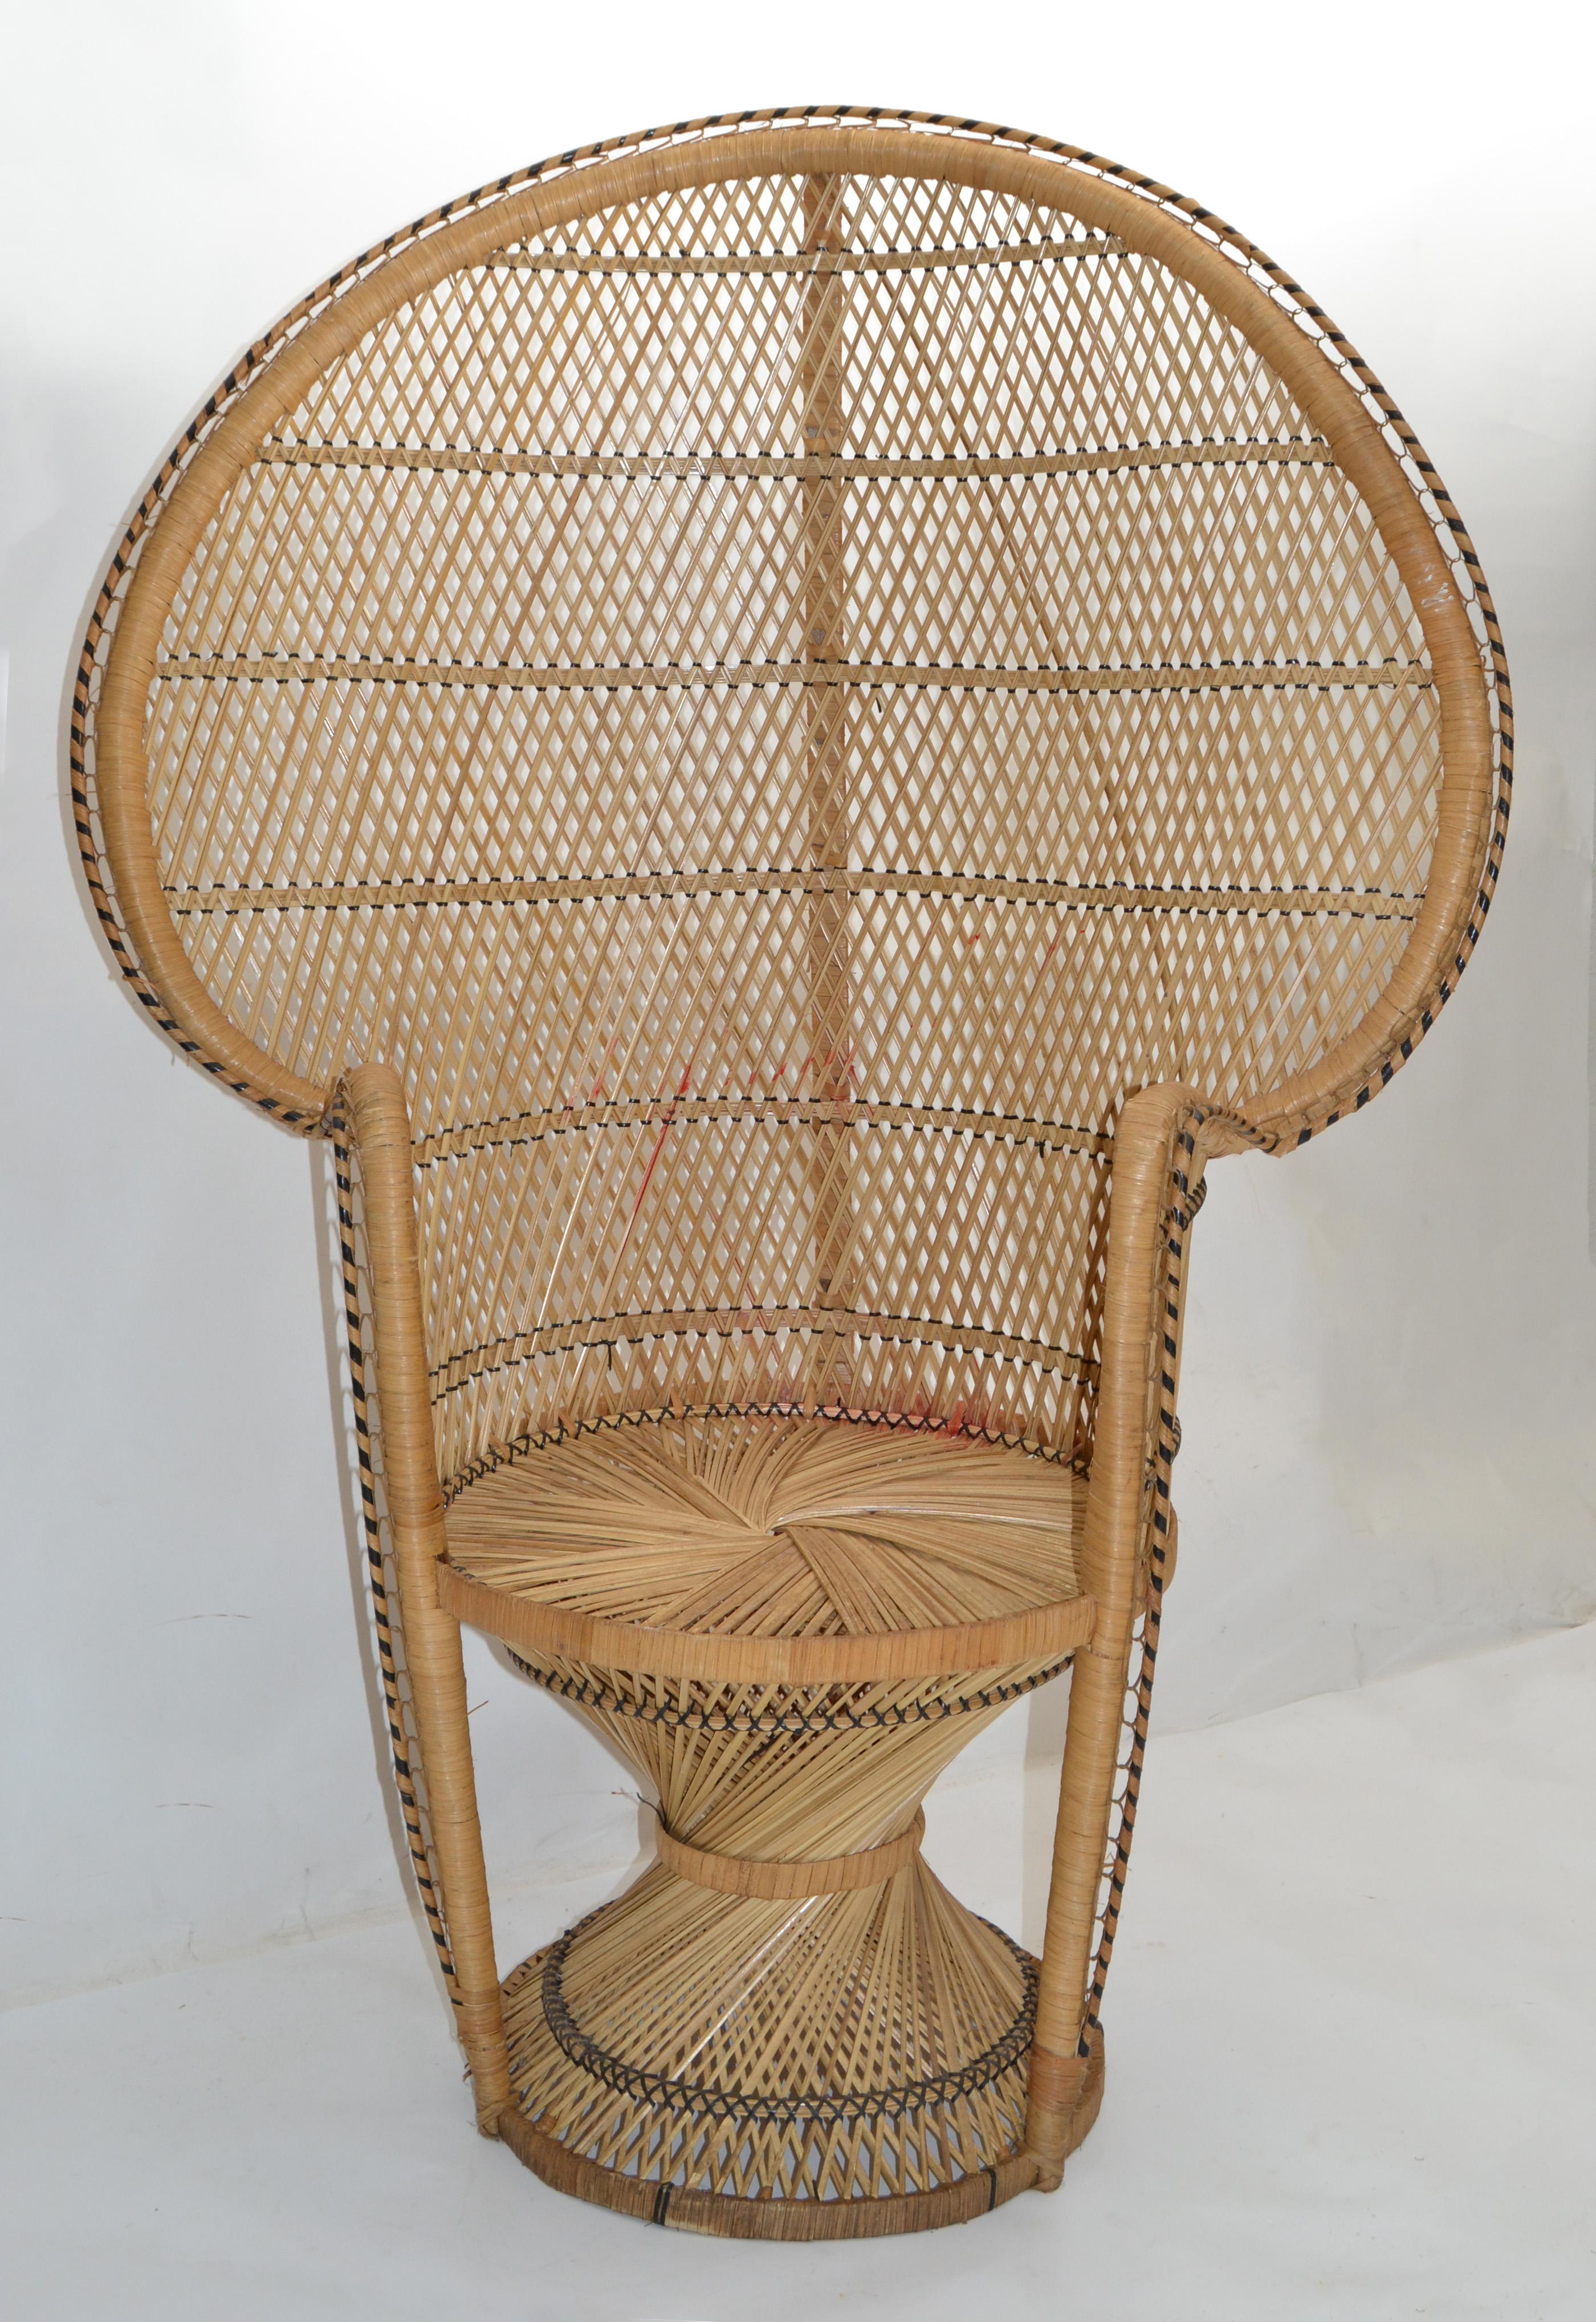 Bohemian Vintage Handcrafted Beige & Black Wicker, Rattan, Reed Peacock Chair For Sale 3